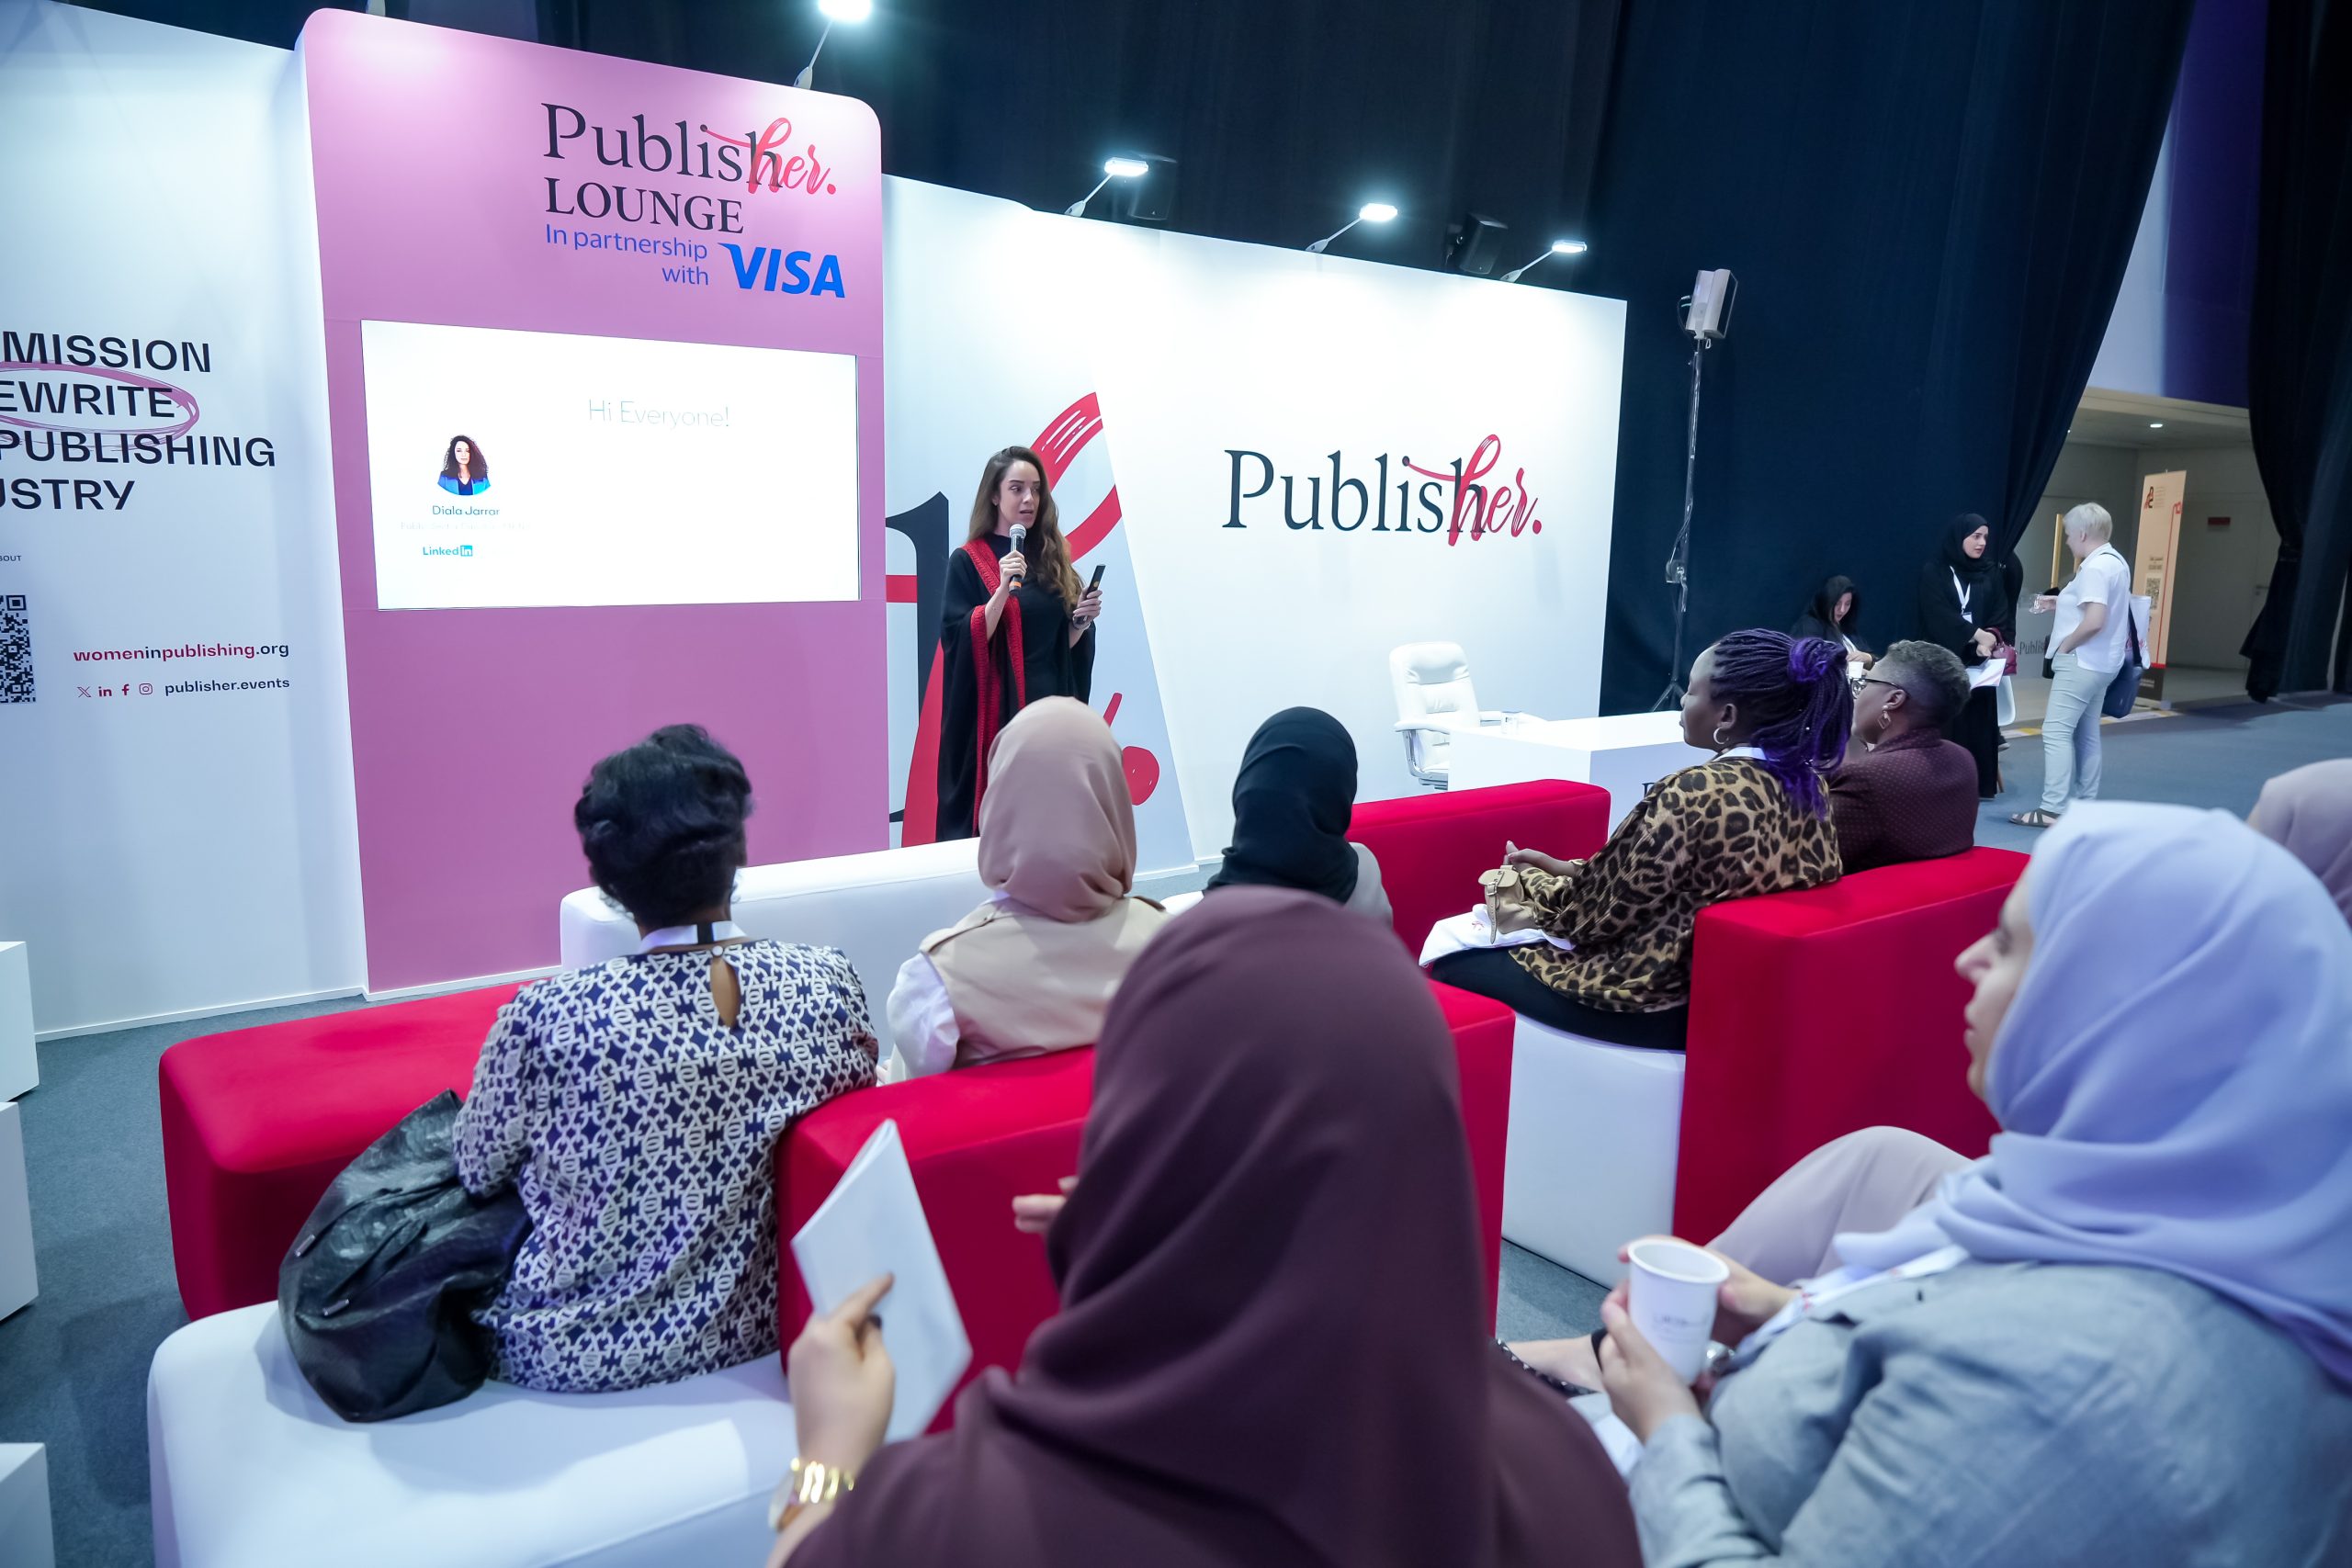 PublisHer empowers bookwomen by giving direct career advice and services at Sharjah Booksellers Conference